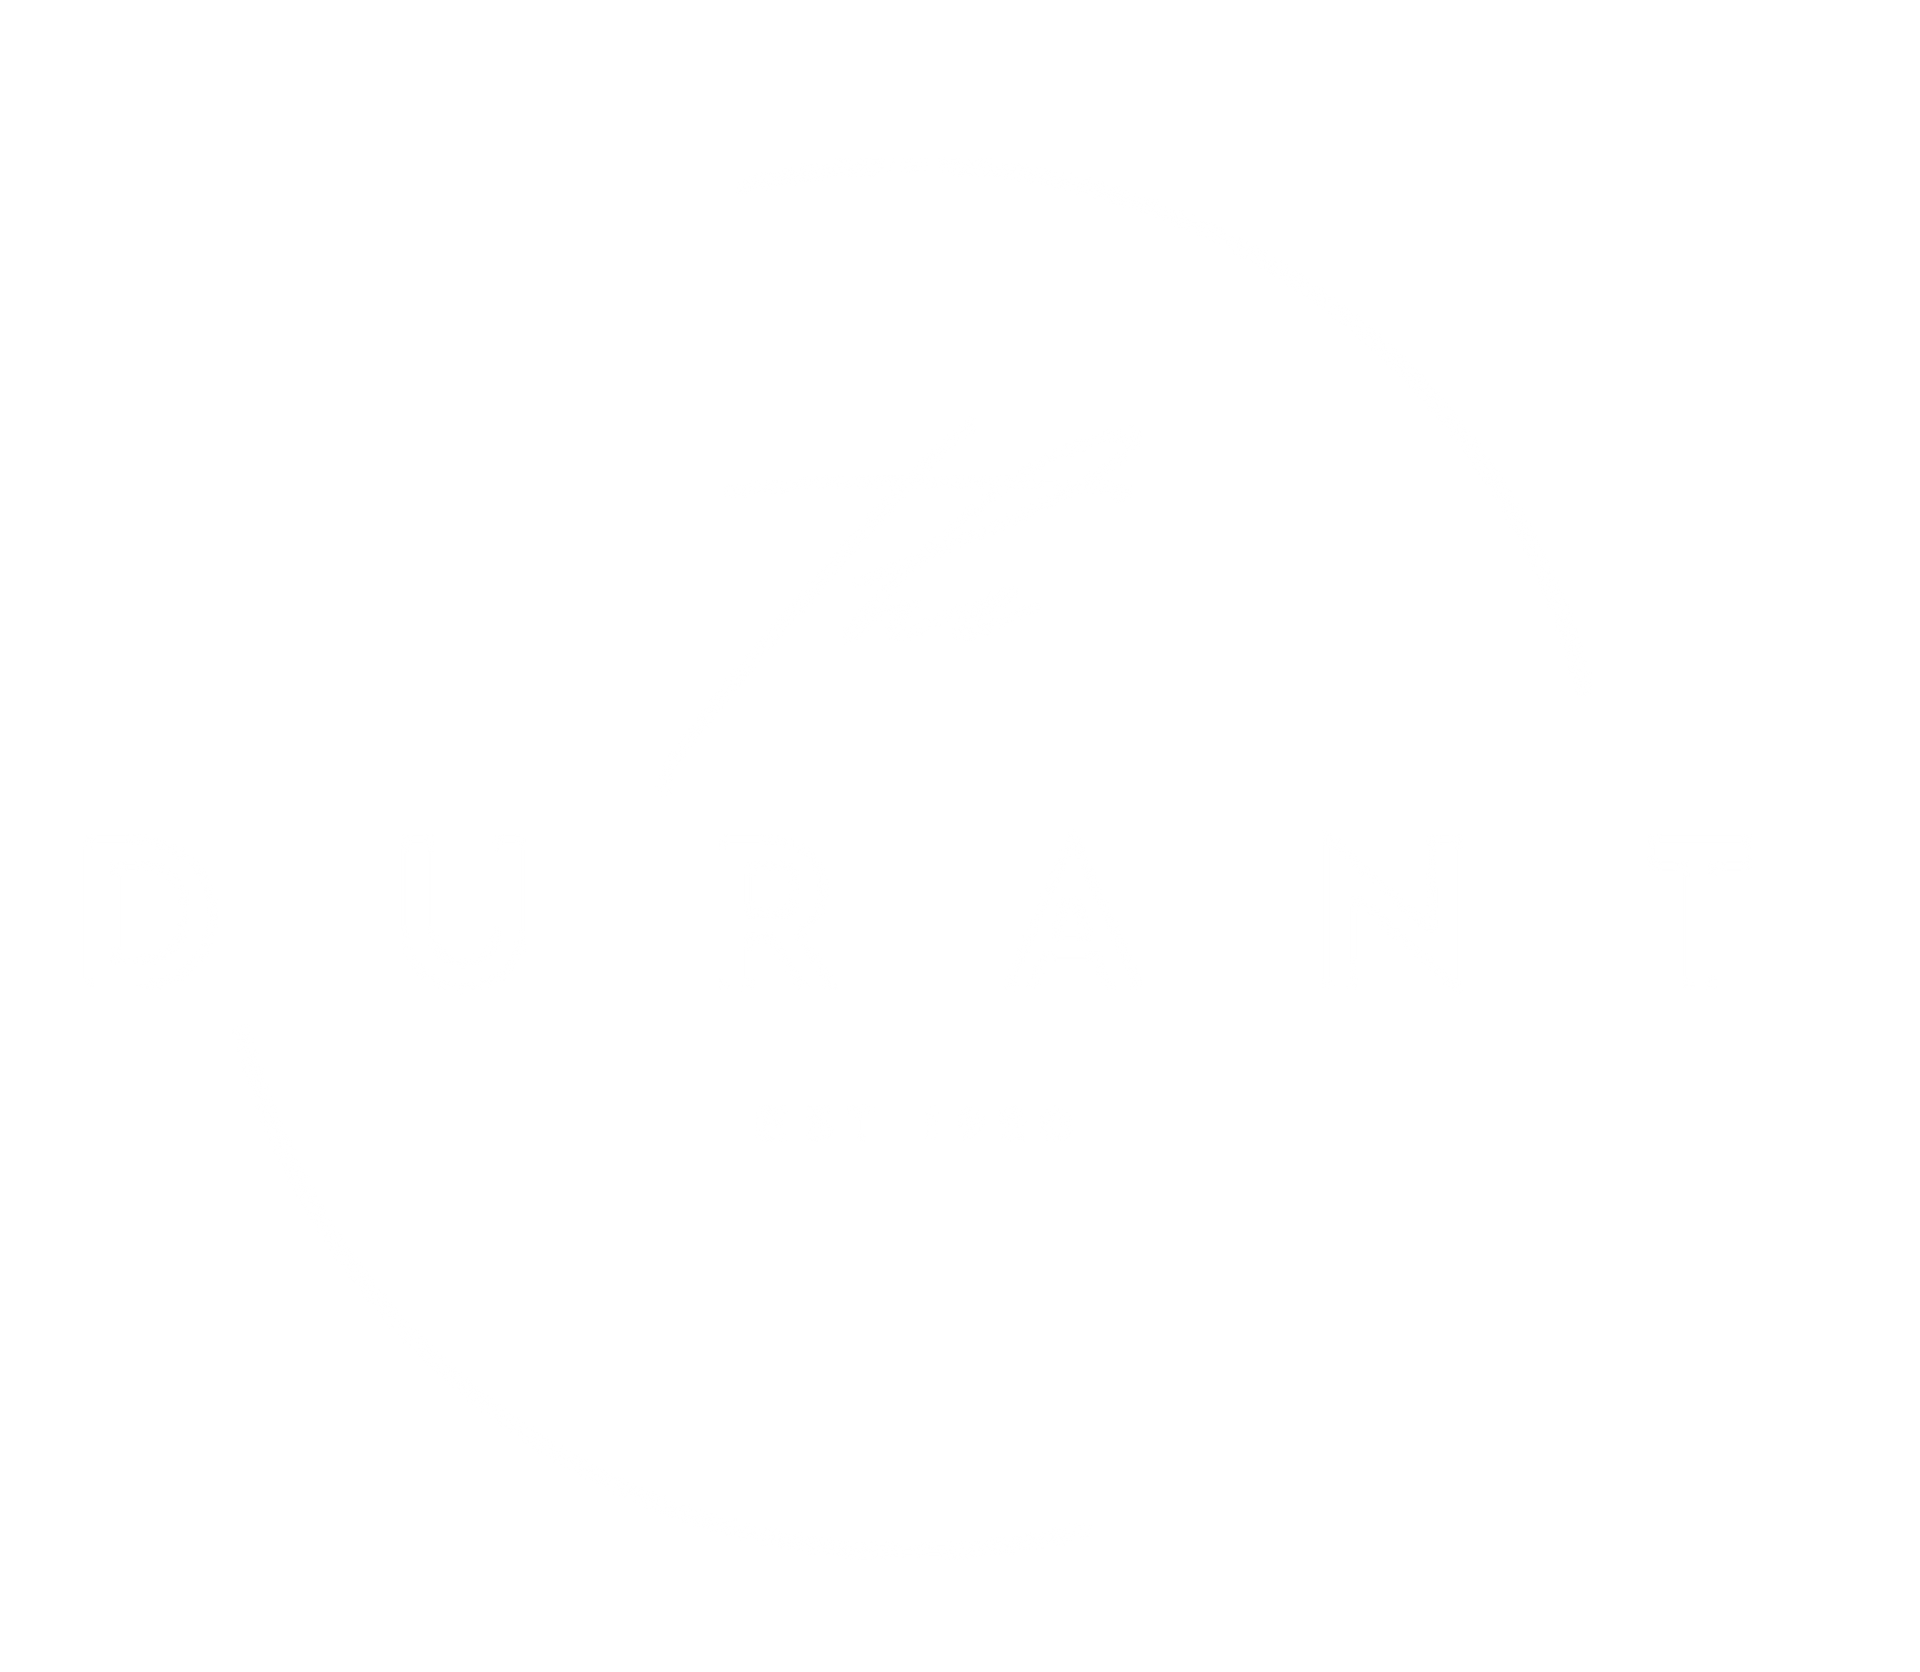 The Durant Logo - Footer, go to homepage